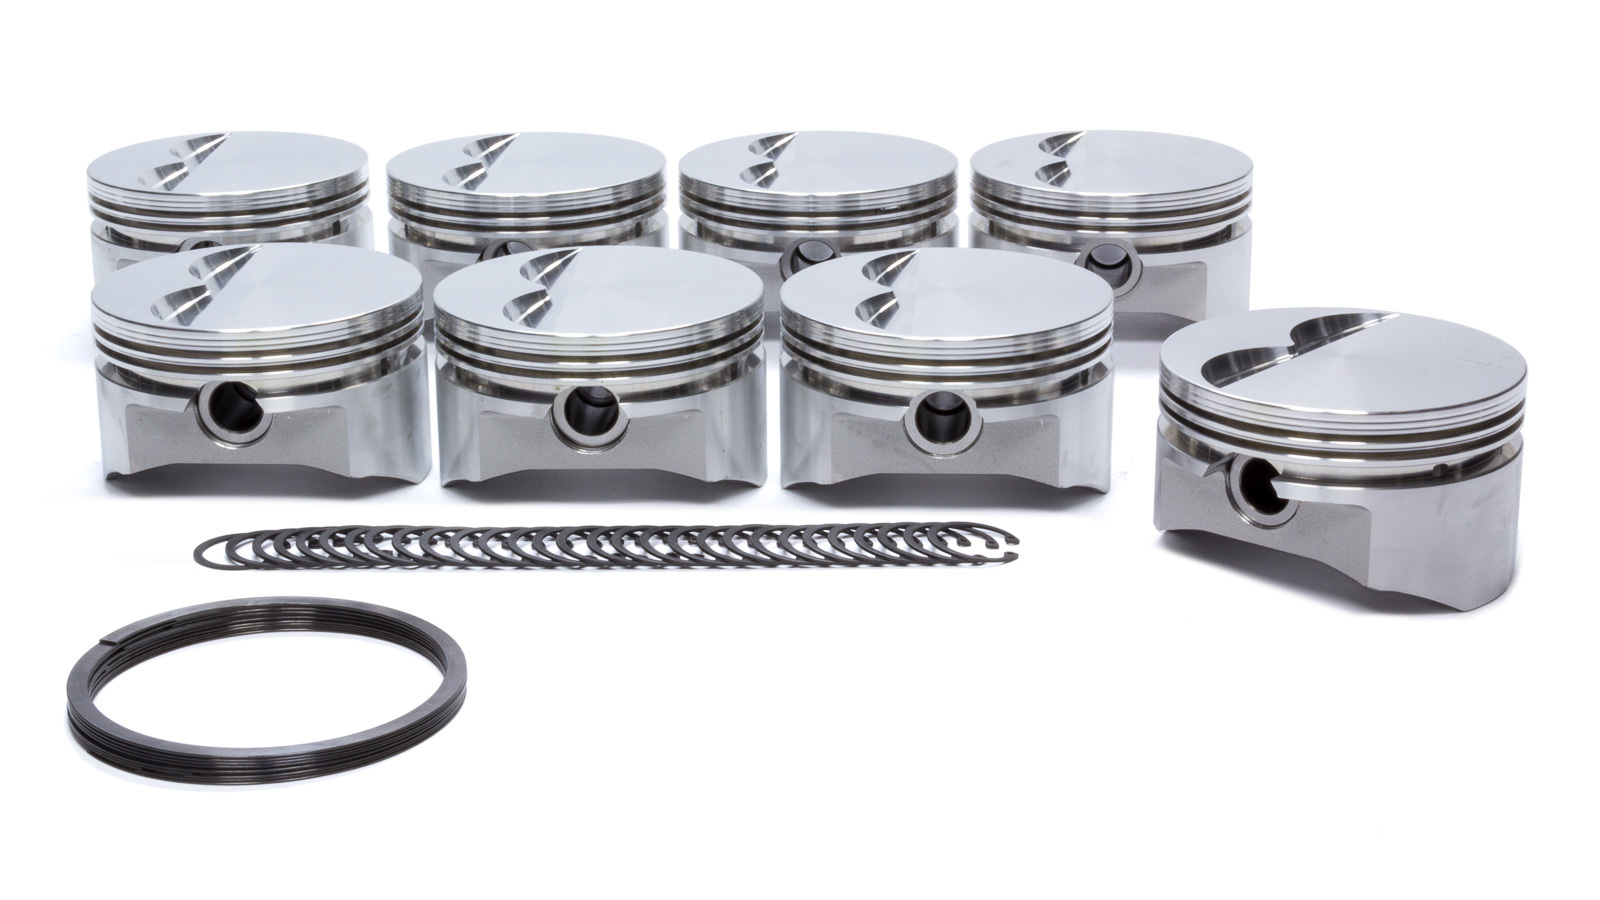 DSS Racing 8715-4030 Piston, E Series, Forged, 4.030 in Bore, 5/64 x 5/64 x 3/16 in Ring Grooves, Minus 5.00 cc, Small Block Chevy, Set of 8